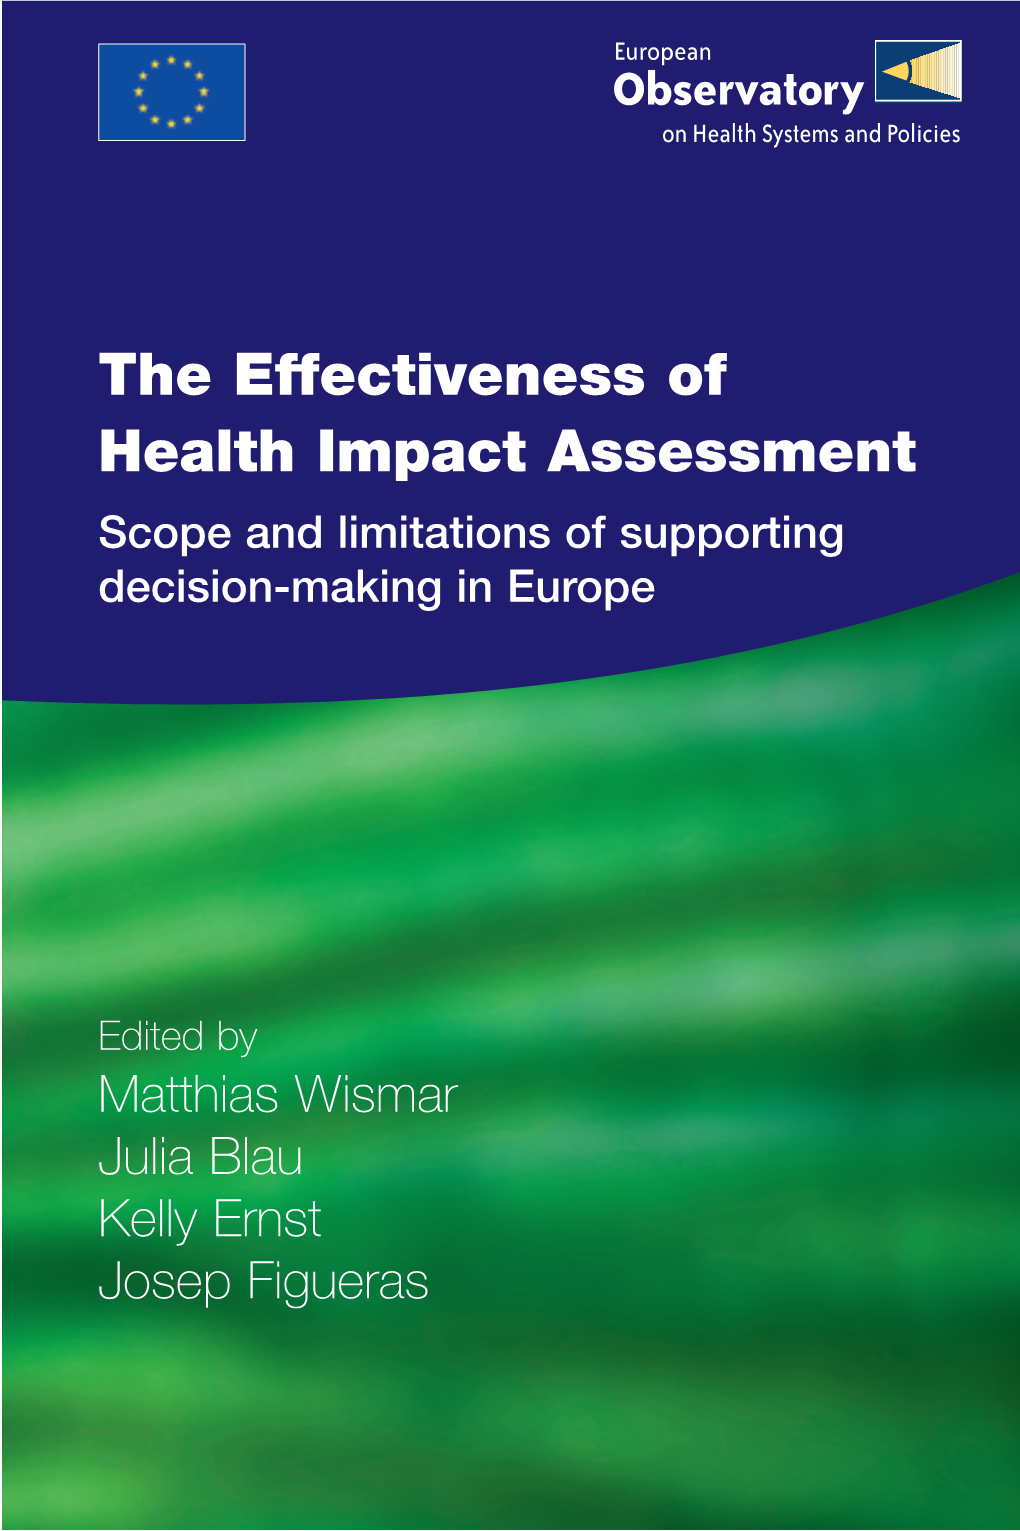 The Effectiveness of Health Impact Assessment. Scope and Limitations